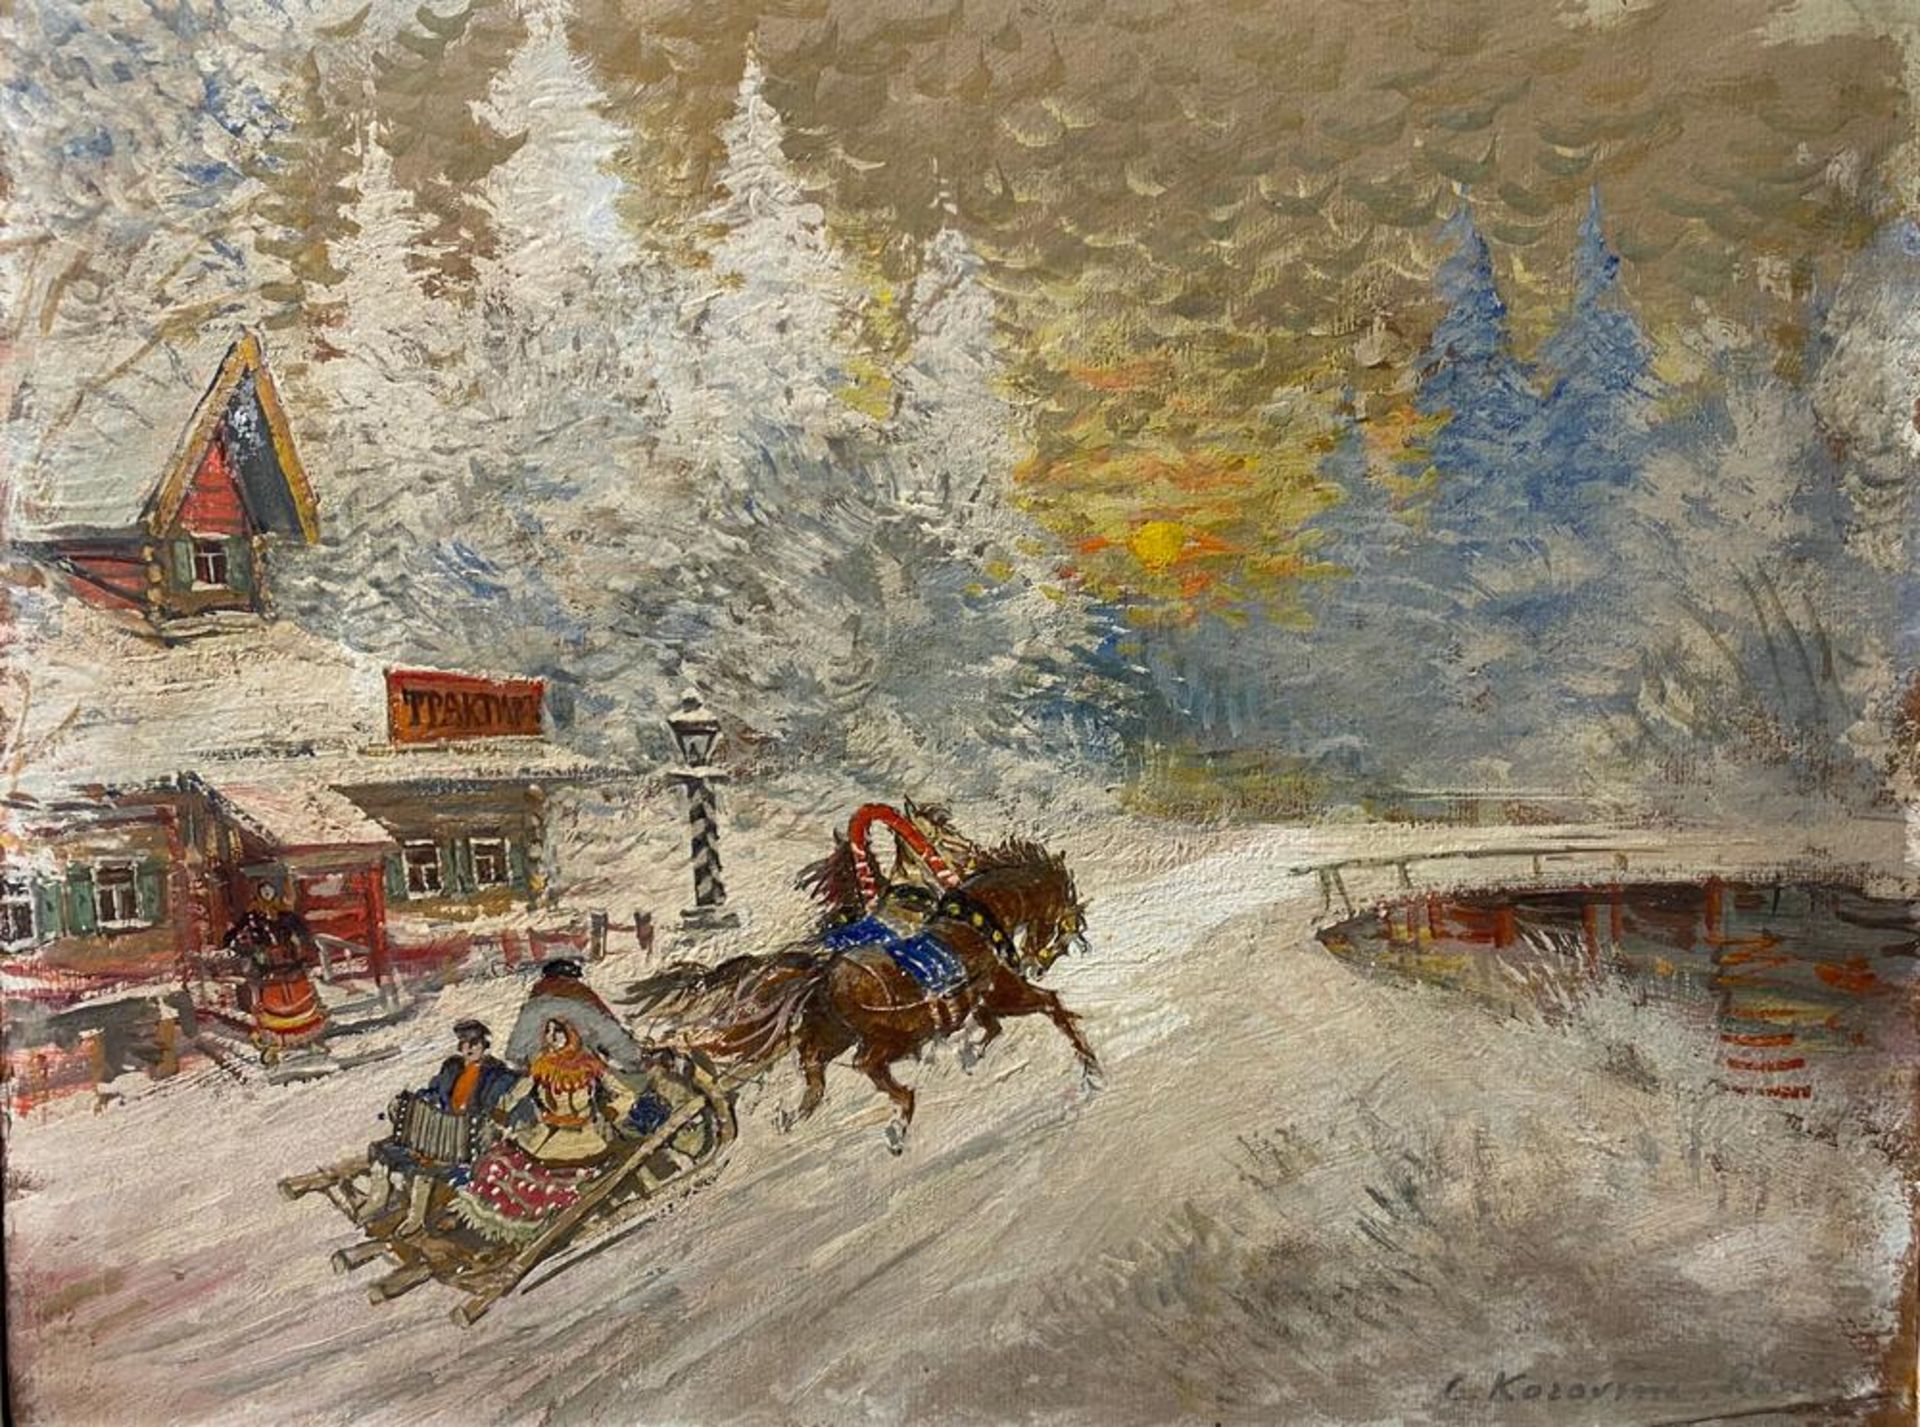 KONSTANTIN KOROVIN (1861-1939) A Sleigh Ride Through the Village - signed and [...] - Image 2 of 5